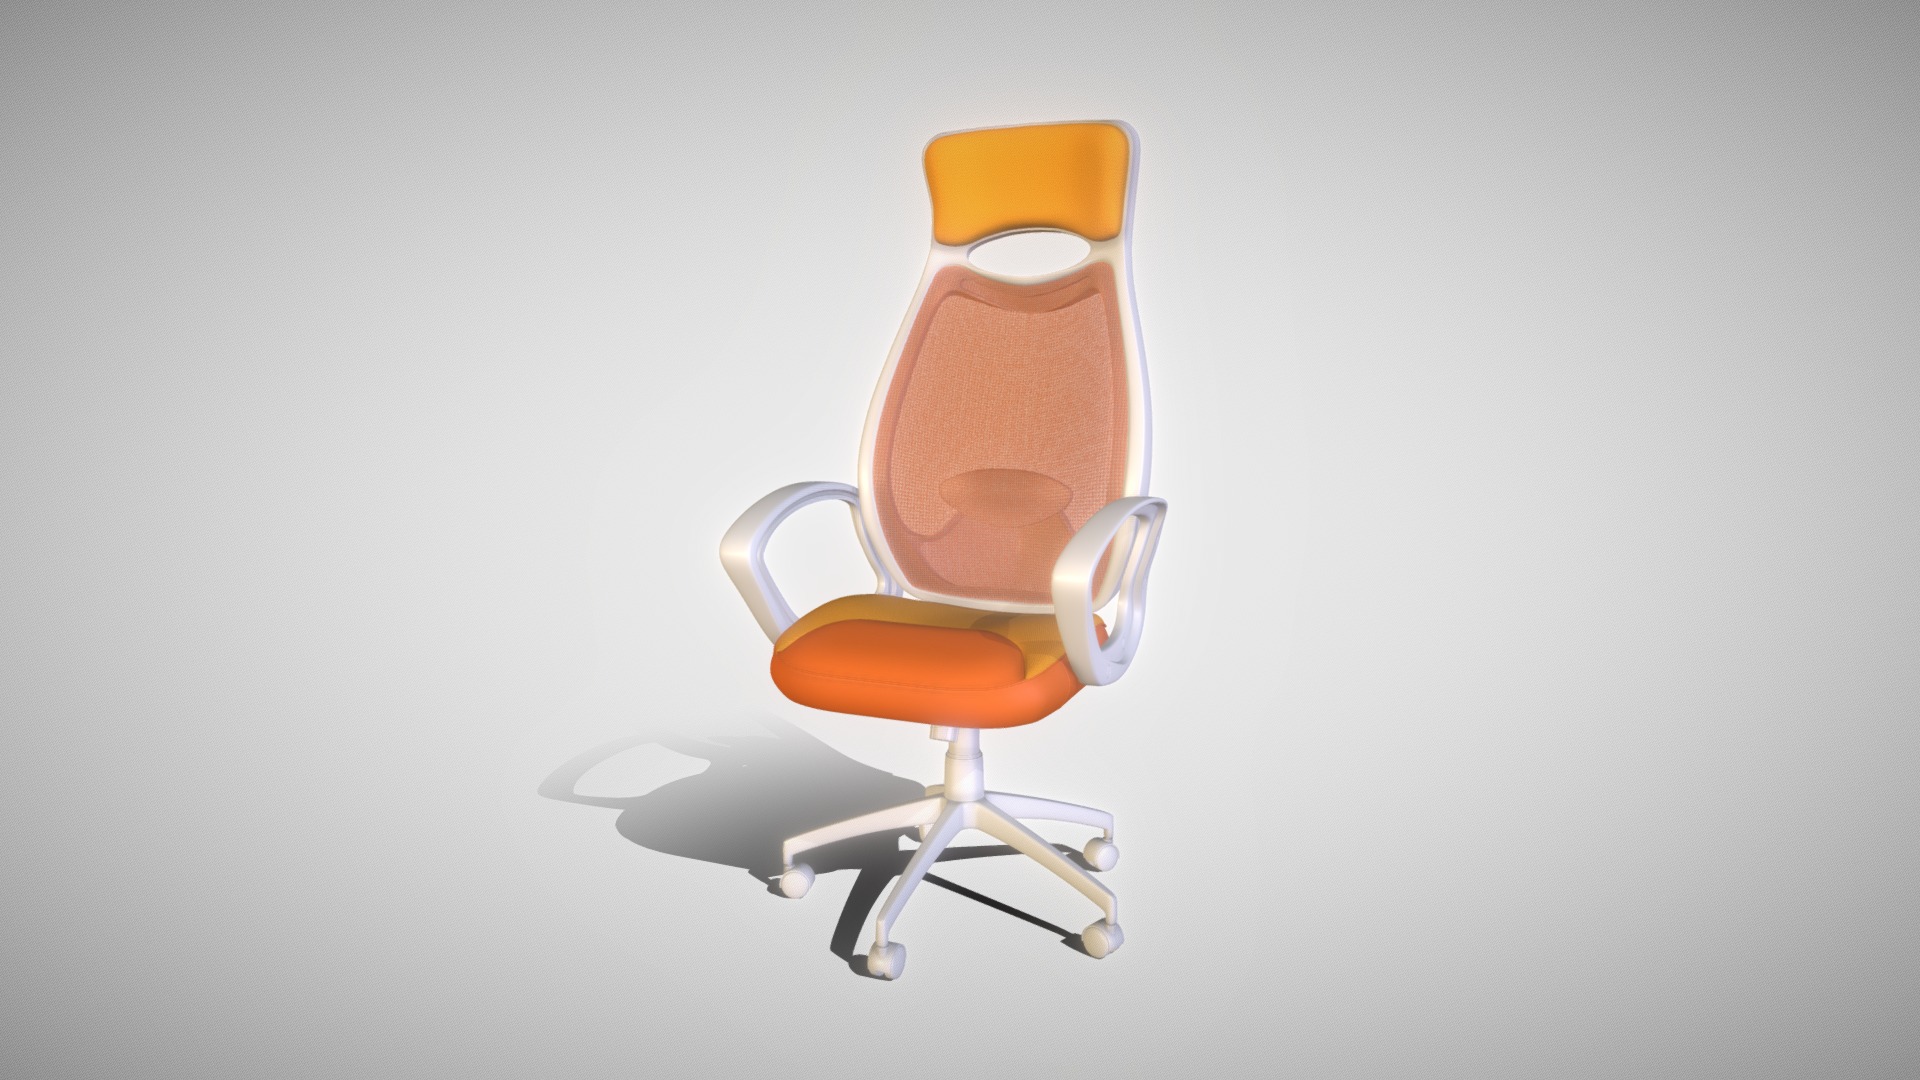 3D model Office chair - This is a 3D model of the Office chair. The 3D model is about an orange chair with a white background.